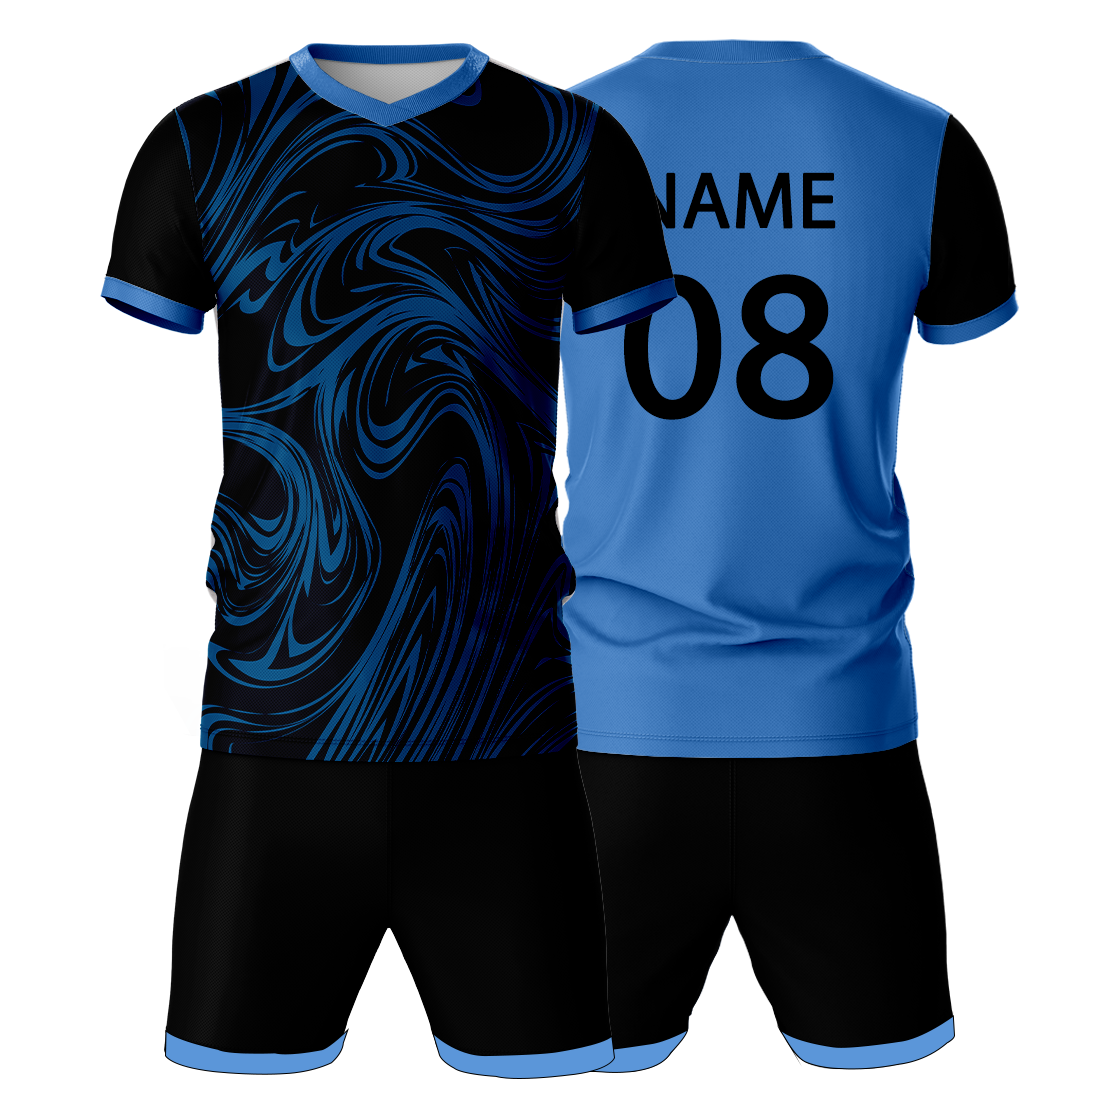 All Over Printed Jersey With Shorts Name & Number Printed.NP50000666